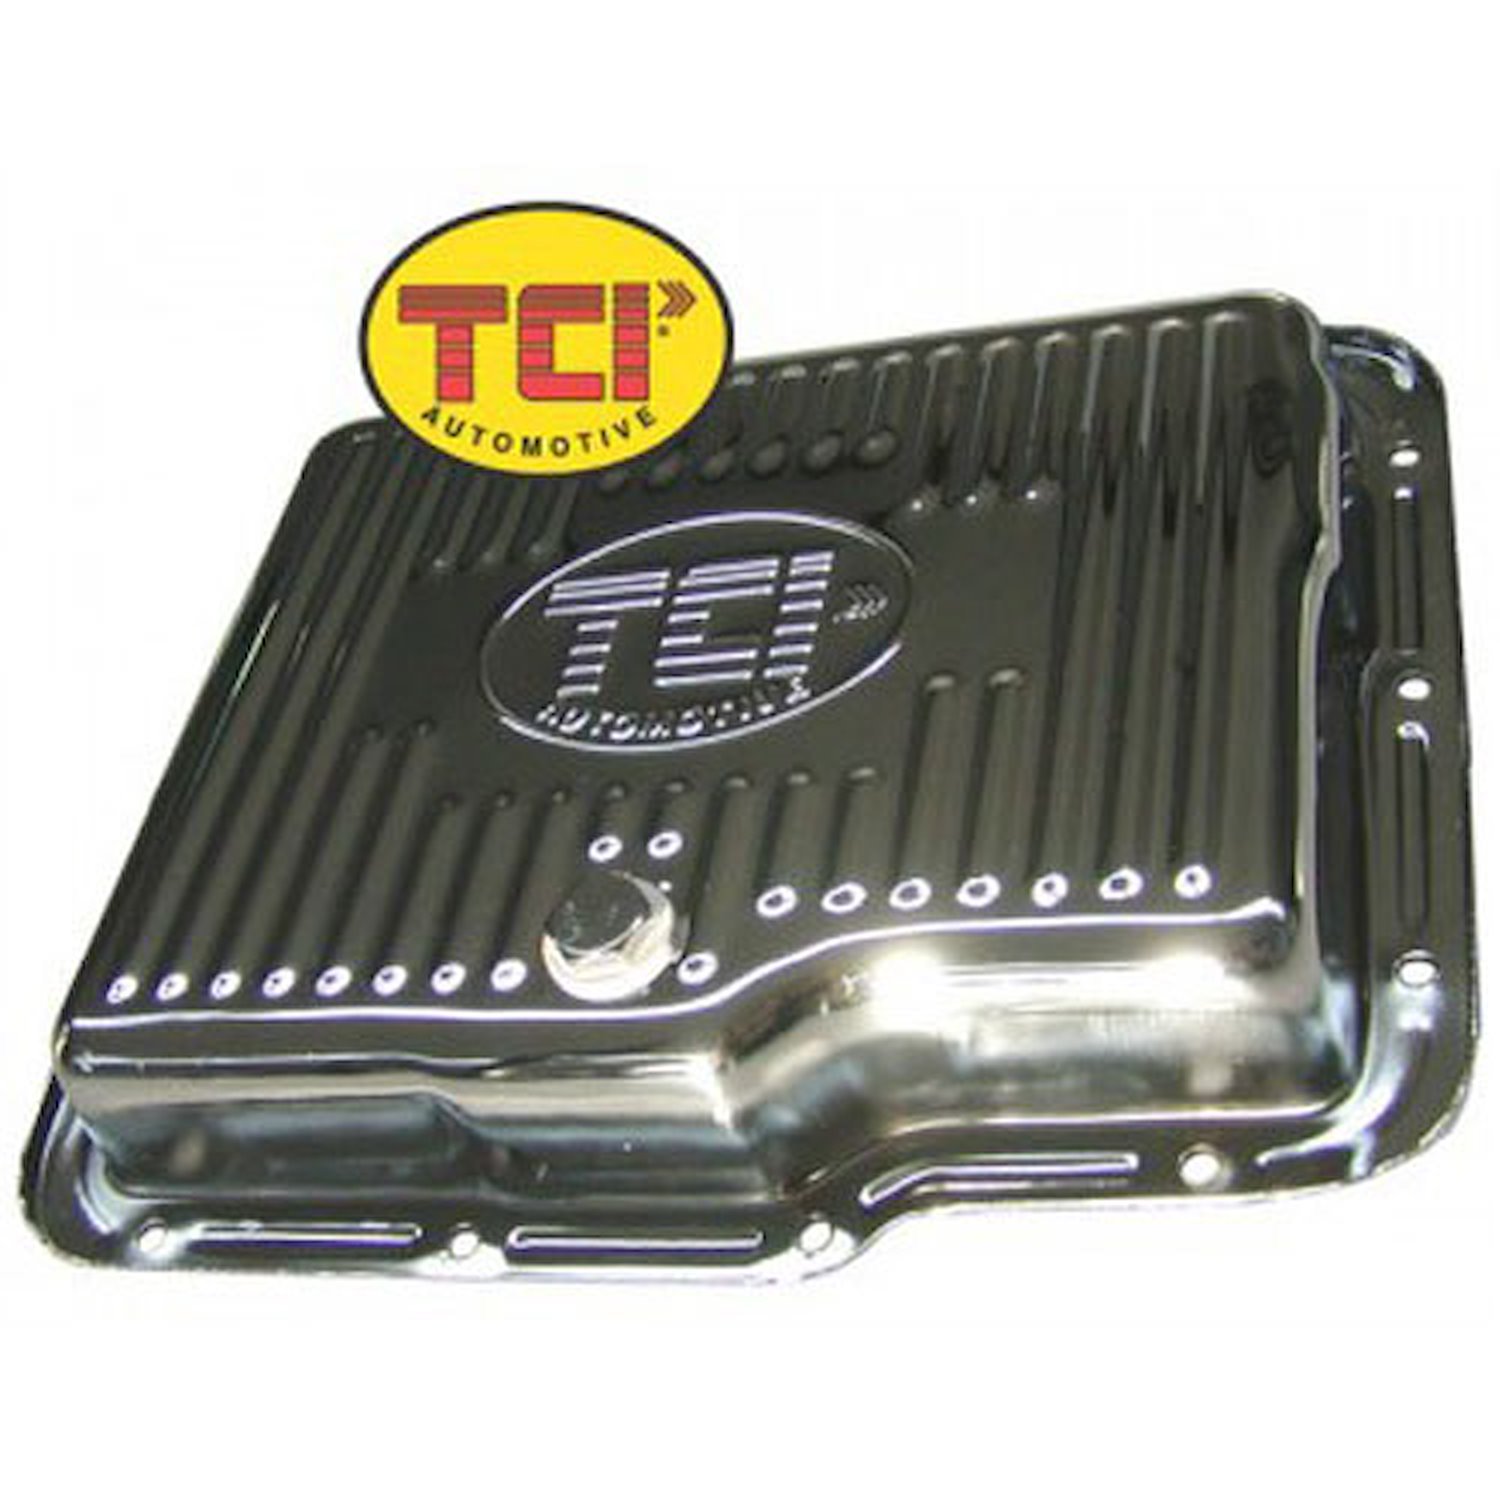 Chrome-Plated Steel Transmission Pan GM Powerglide